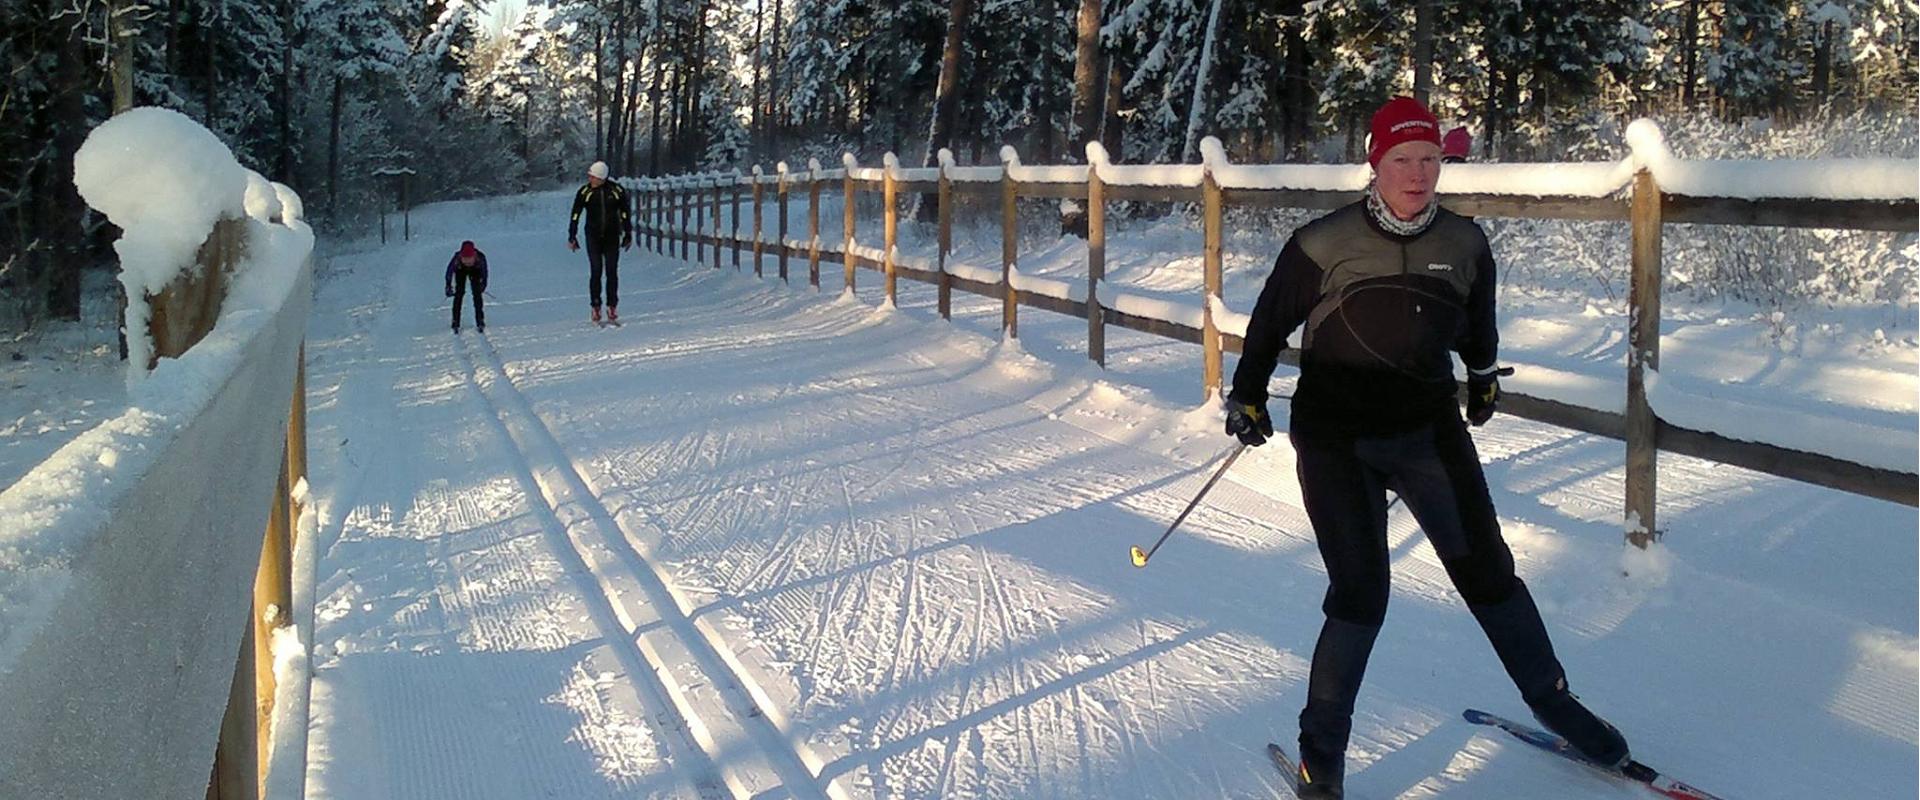 Ski trails at the Palivere Tourism and Recreational Sports Centre